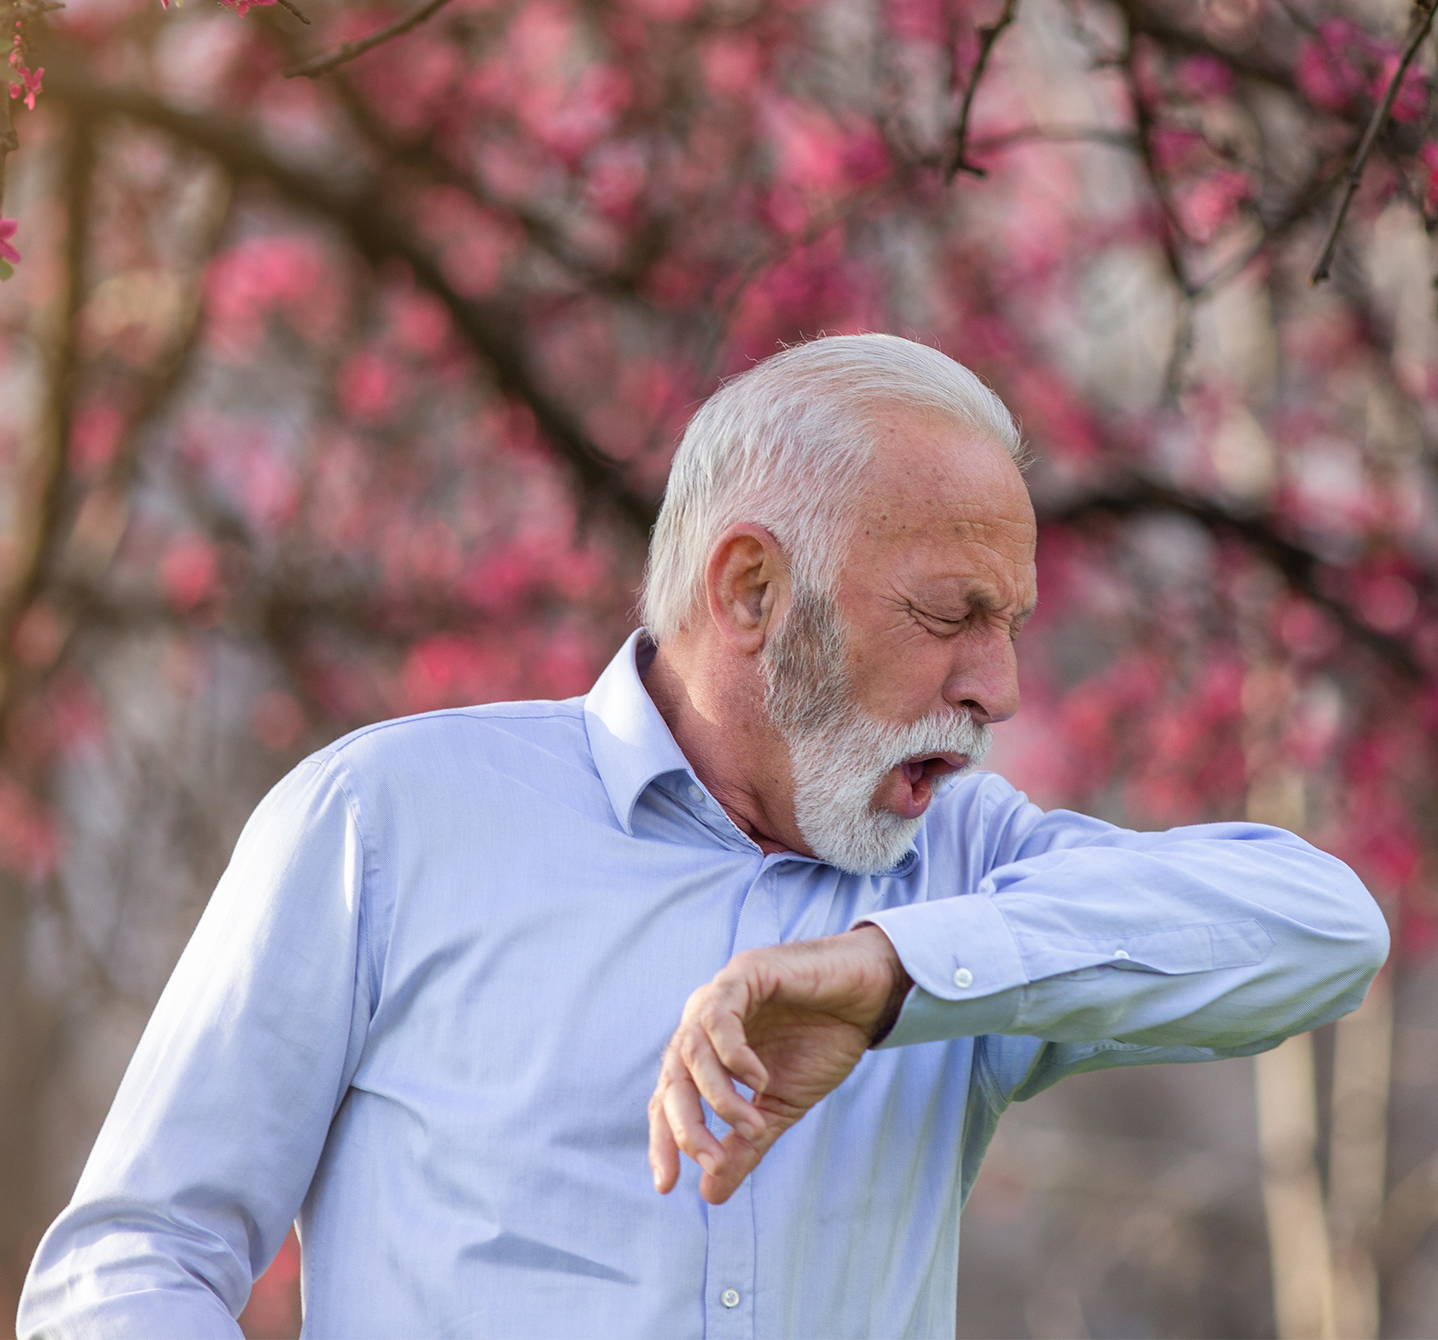 Allergy cough: Maybe this man coughing into his elbow in the park is having an allergic reaction to pollen